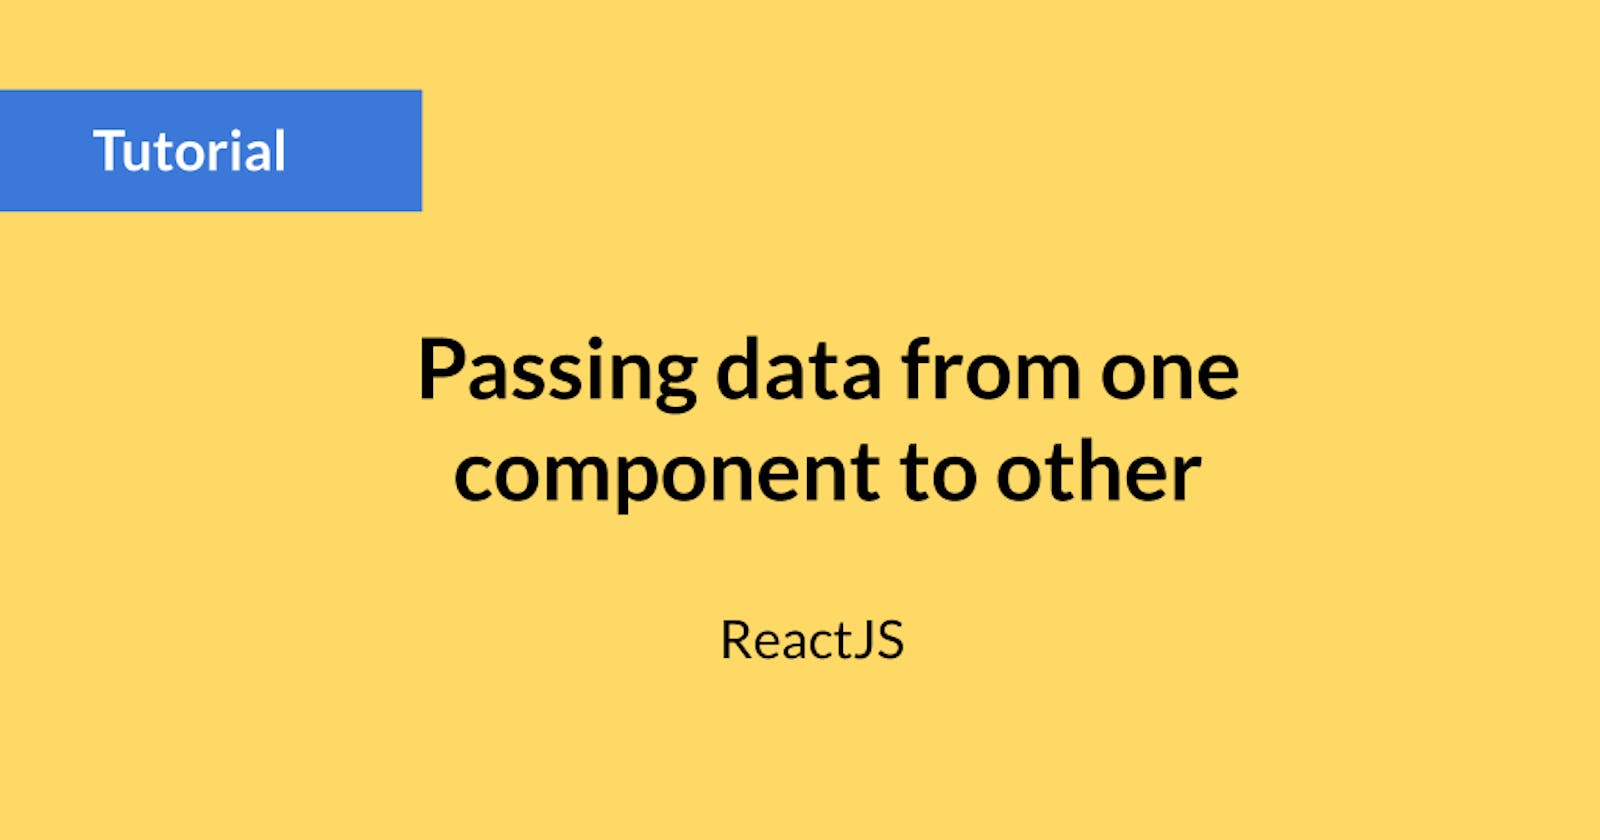 How to Pass Data From One Component to Other Component in React?